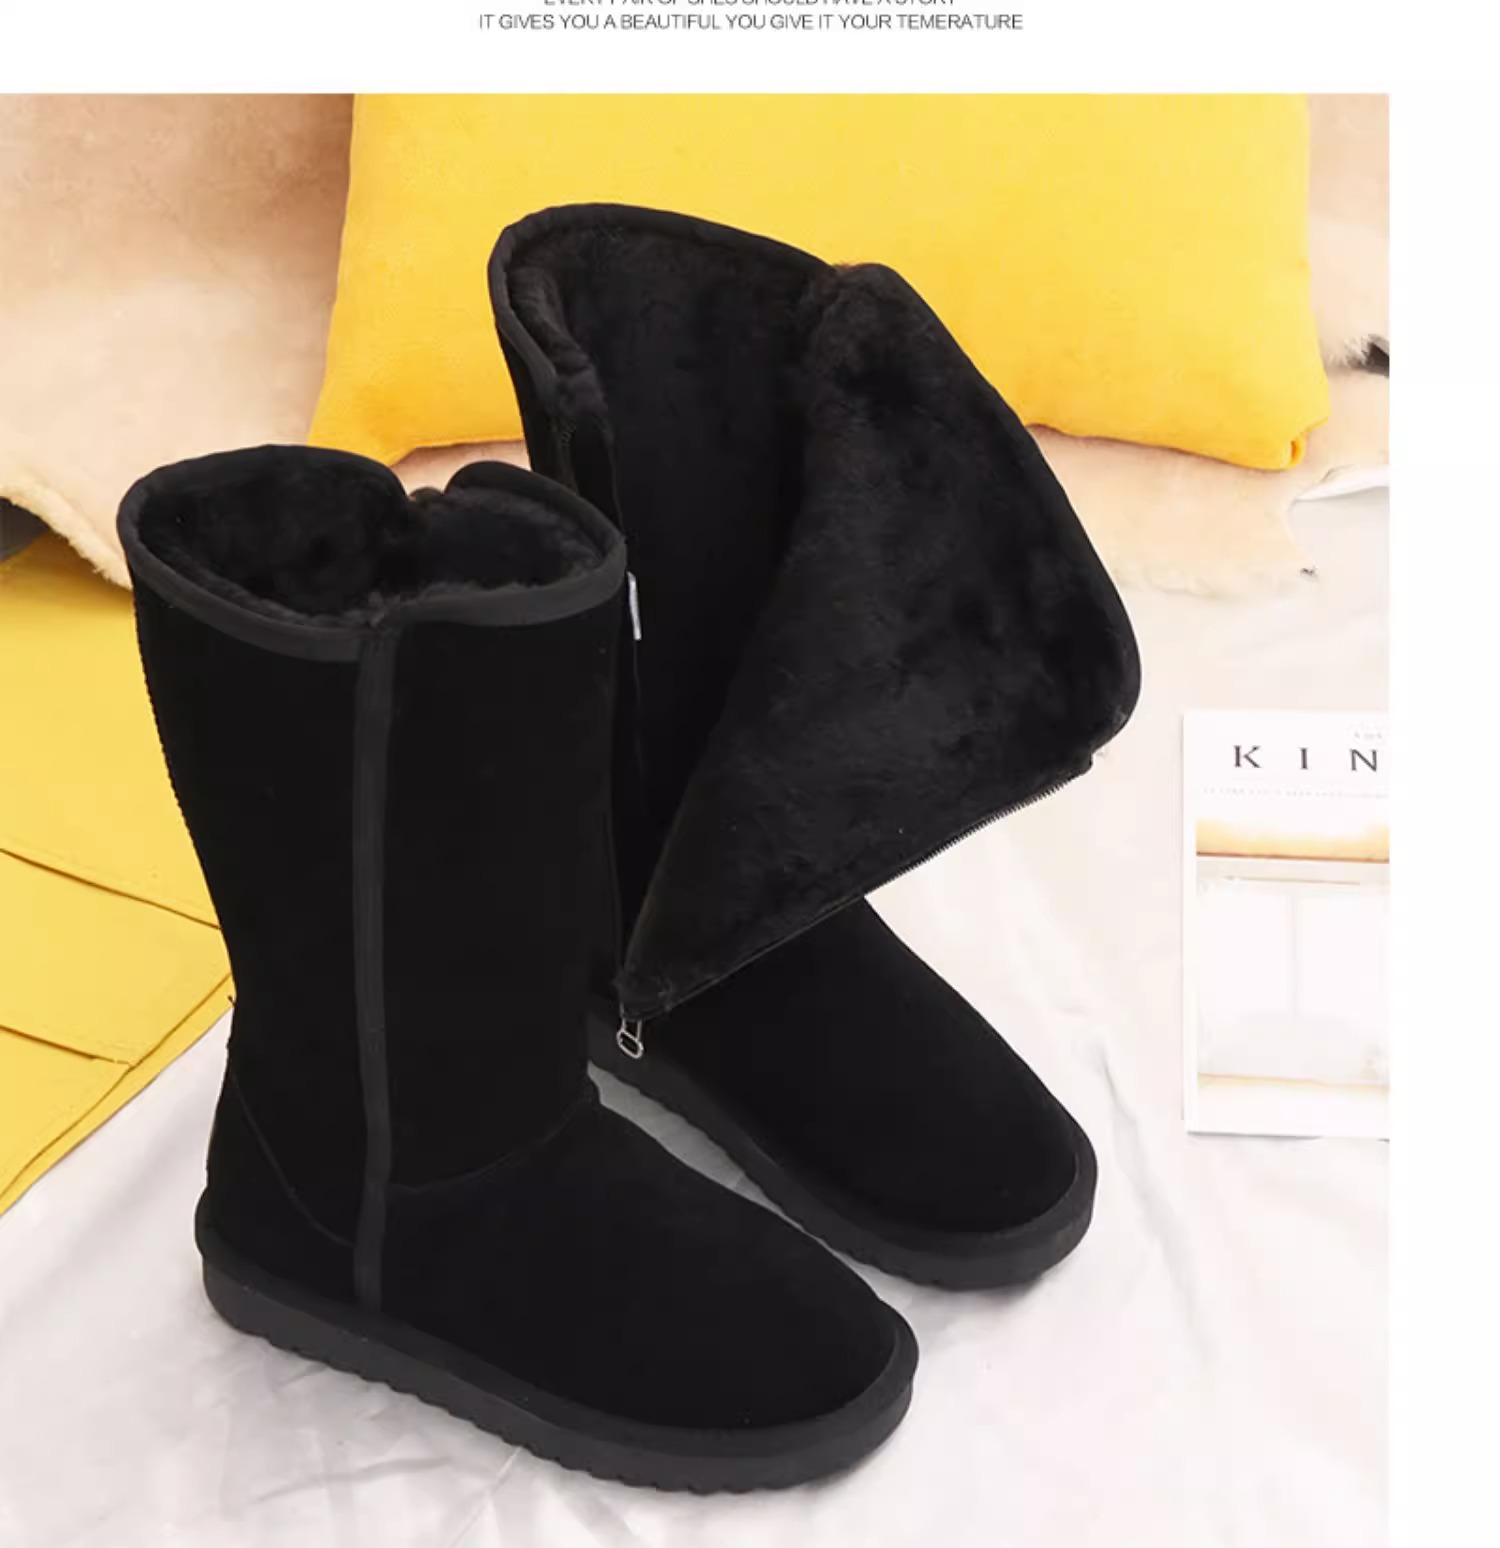 come4buy.com-Women's Snow Boots Suede Leather Concise Zipper Boots